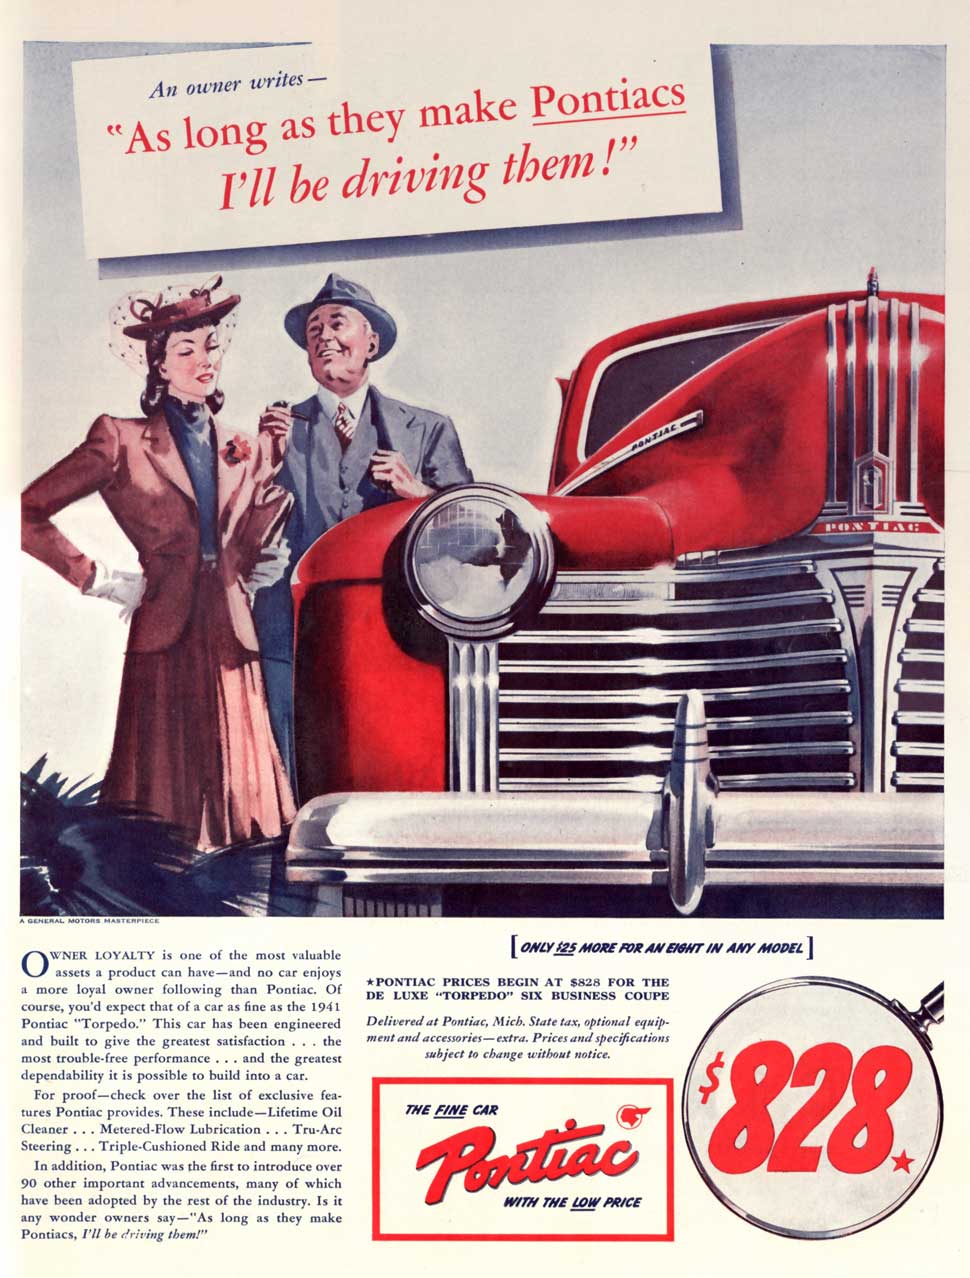 1941 As long as they make Pontiacs